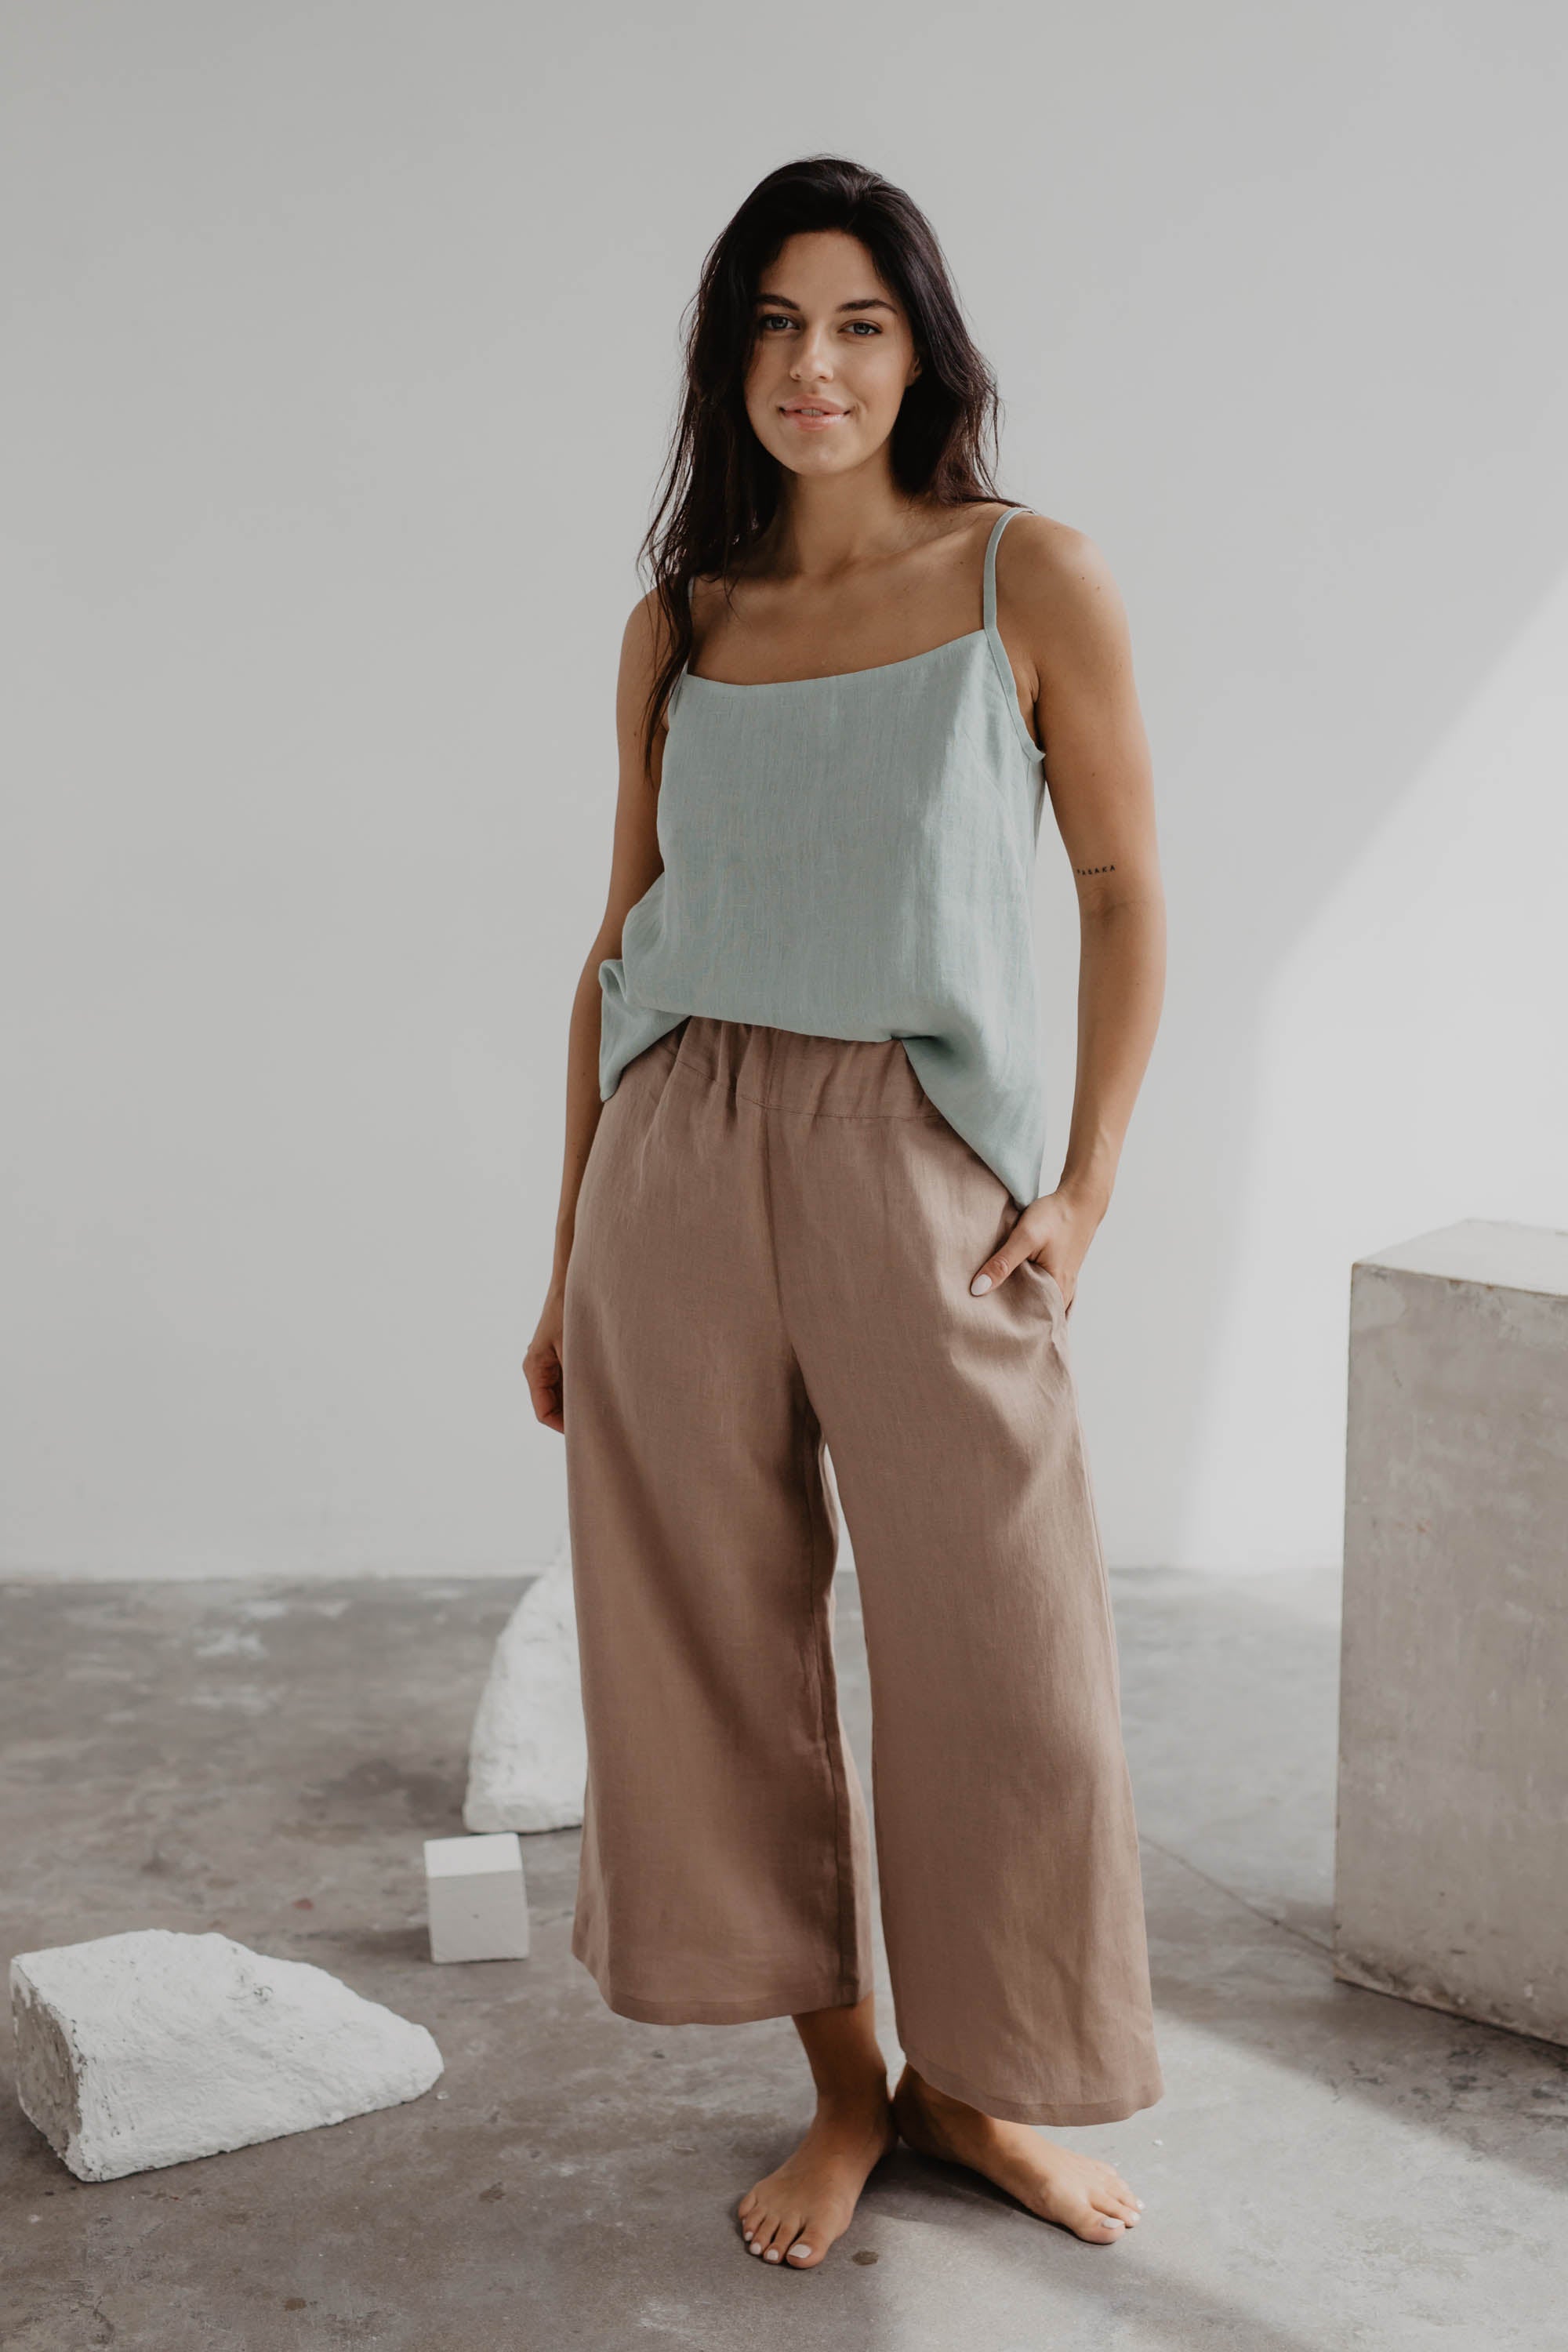 Woman In Gallery Wearing Dusty Rose Linen Pants and Sage Green Linen Top By Amourlinen